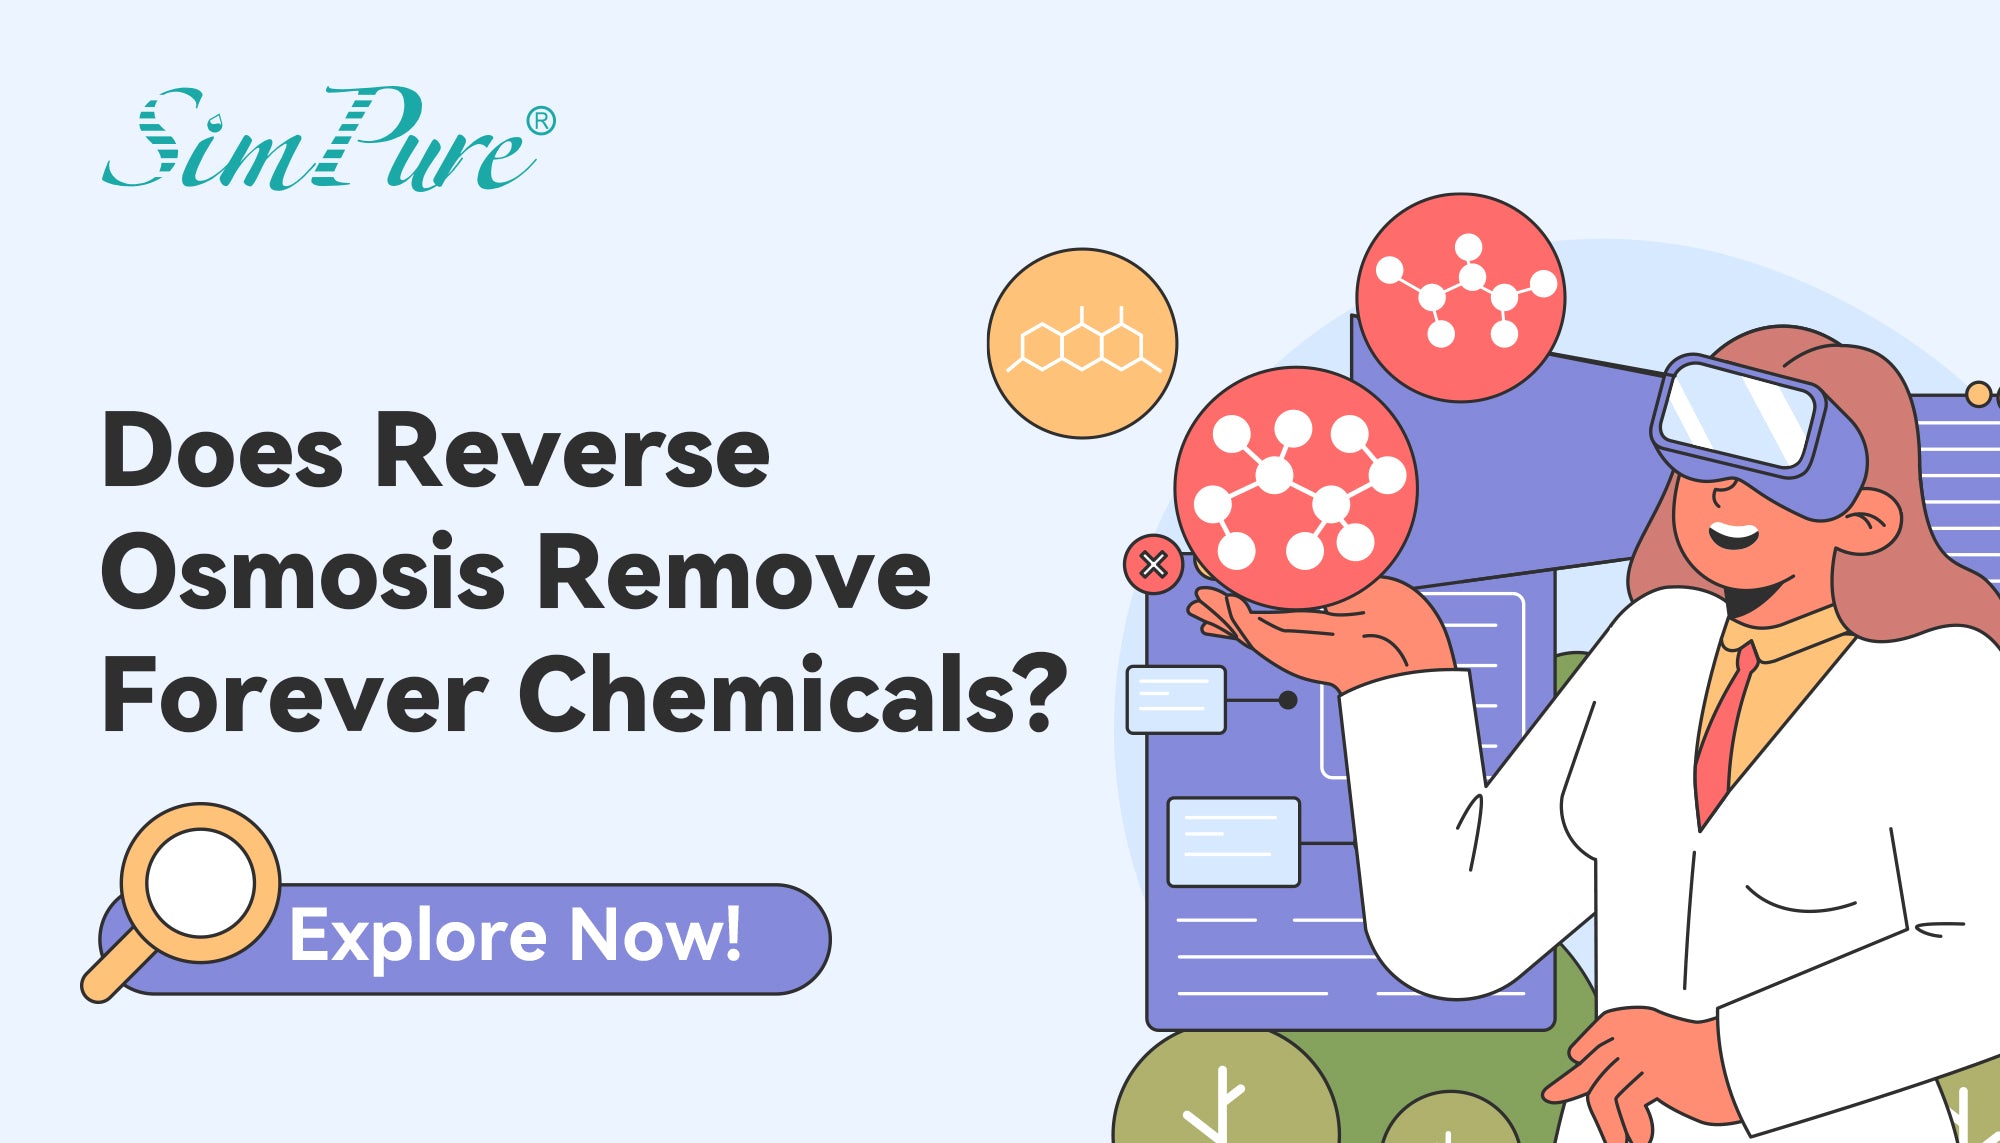 Does Reverse Osmosis Remove Forever Chemicals? Explore Now!